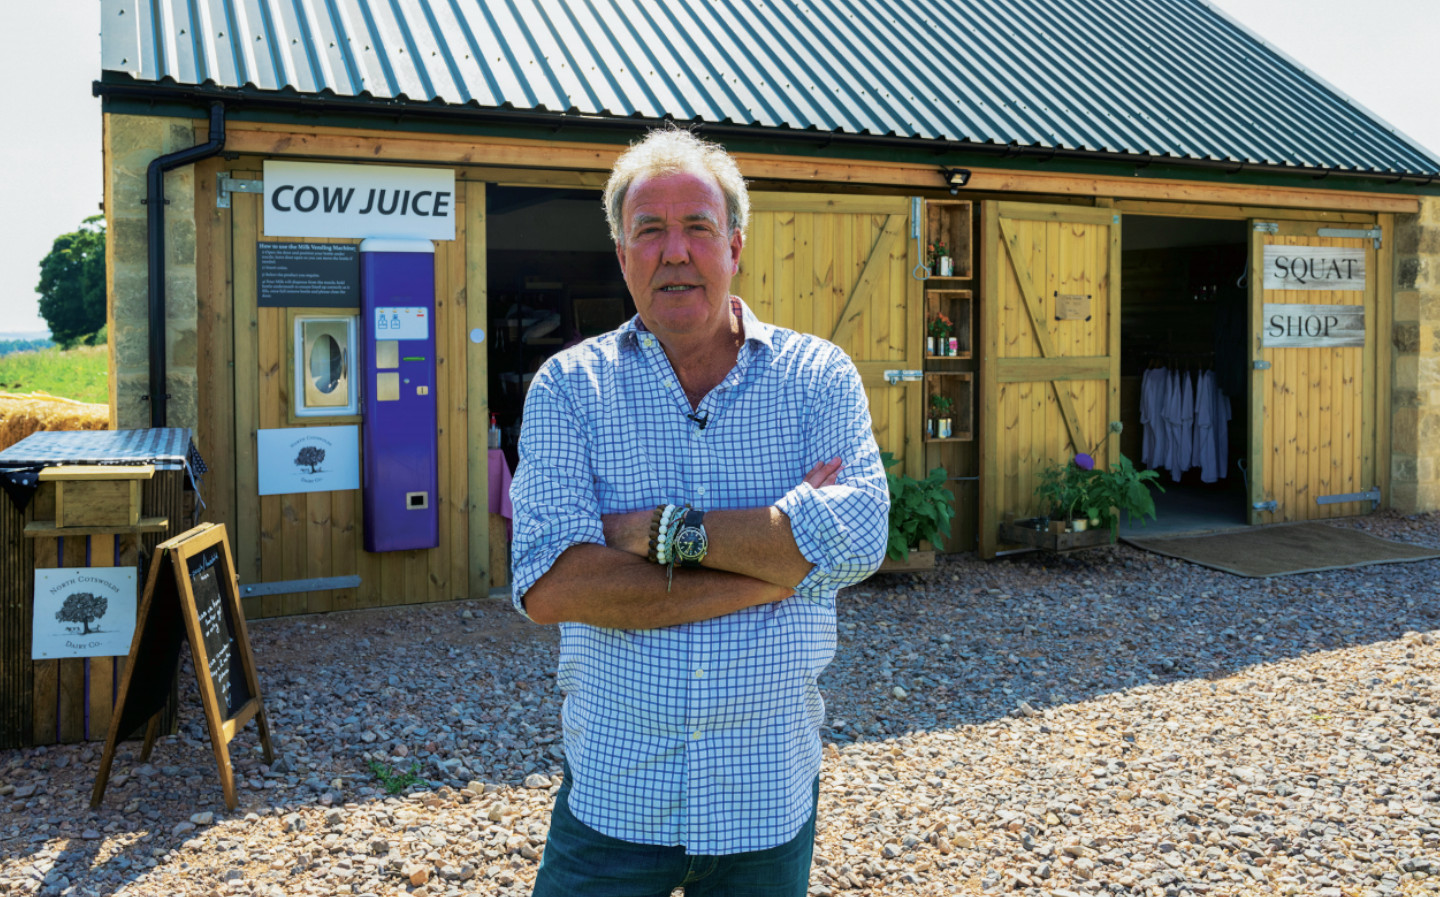 Jeremy Clarkson has turned his farm shop around, with a little help from his friends